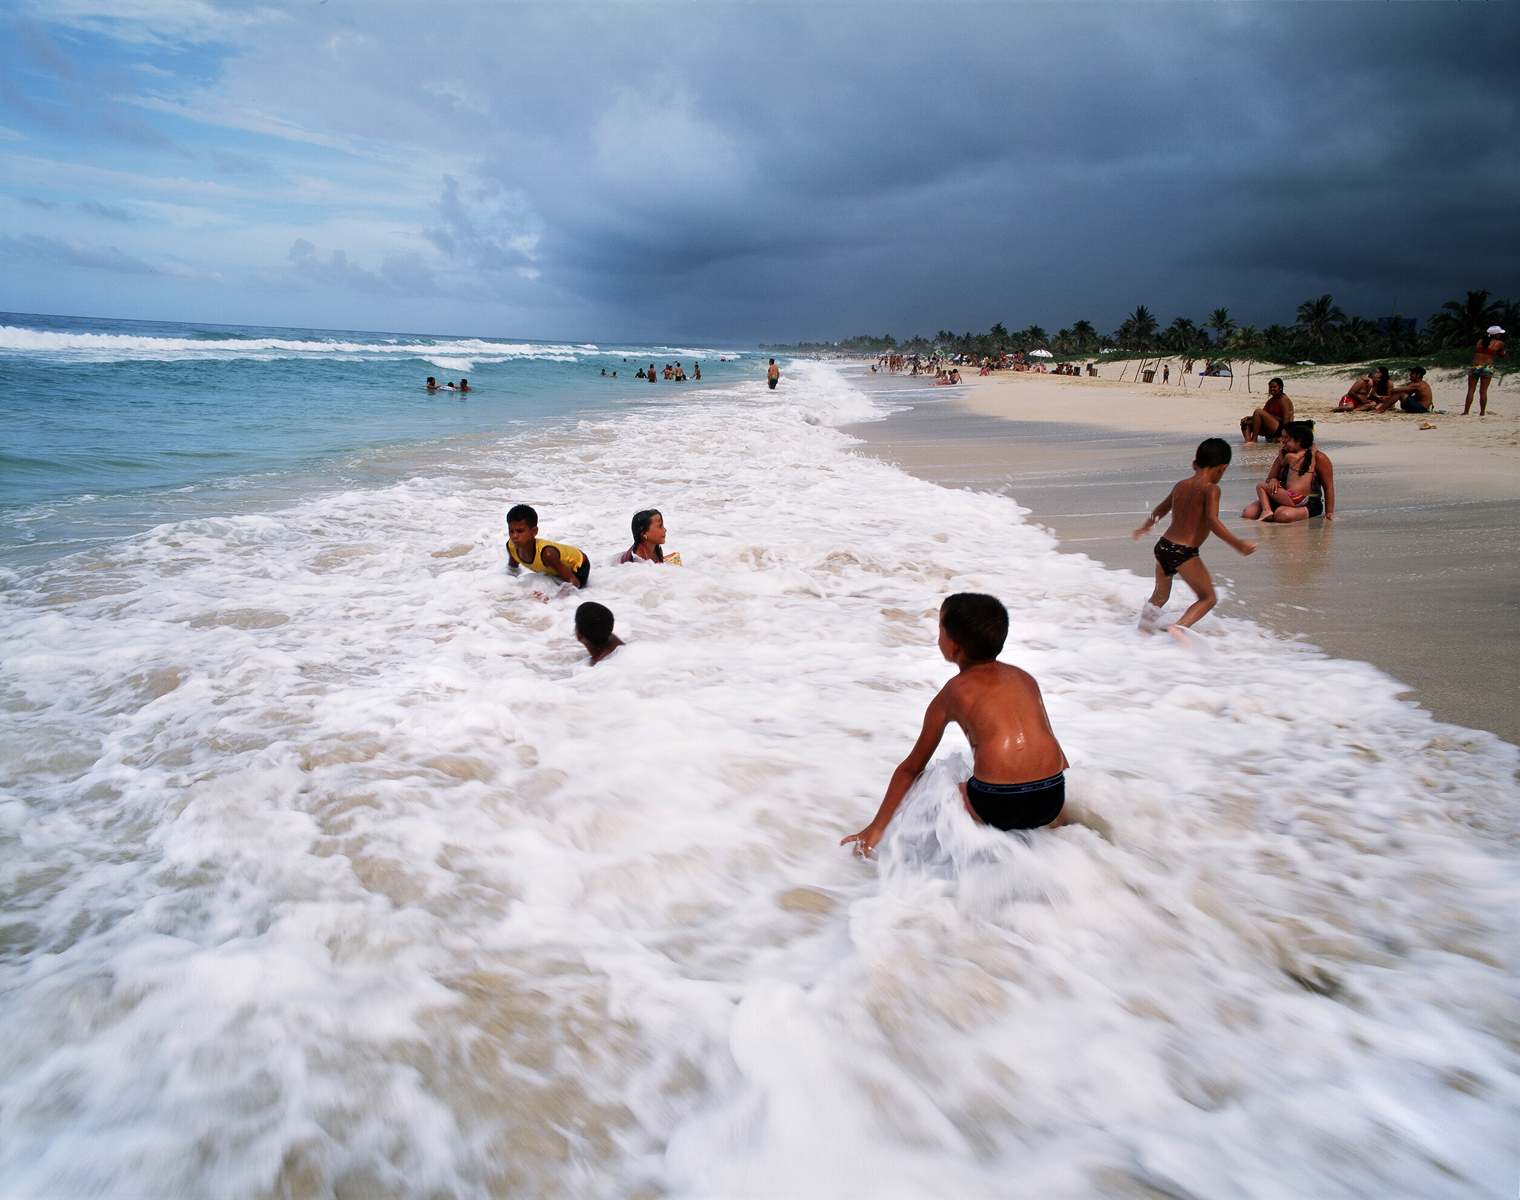 Children playing in the waves at Playa del Este, a popular beach for Cubans, 45 minutes east of Havana province. Playa del Este, Cuba